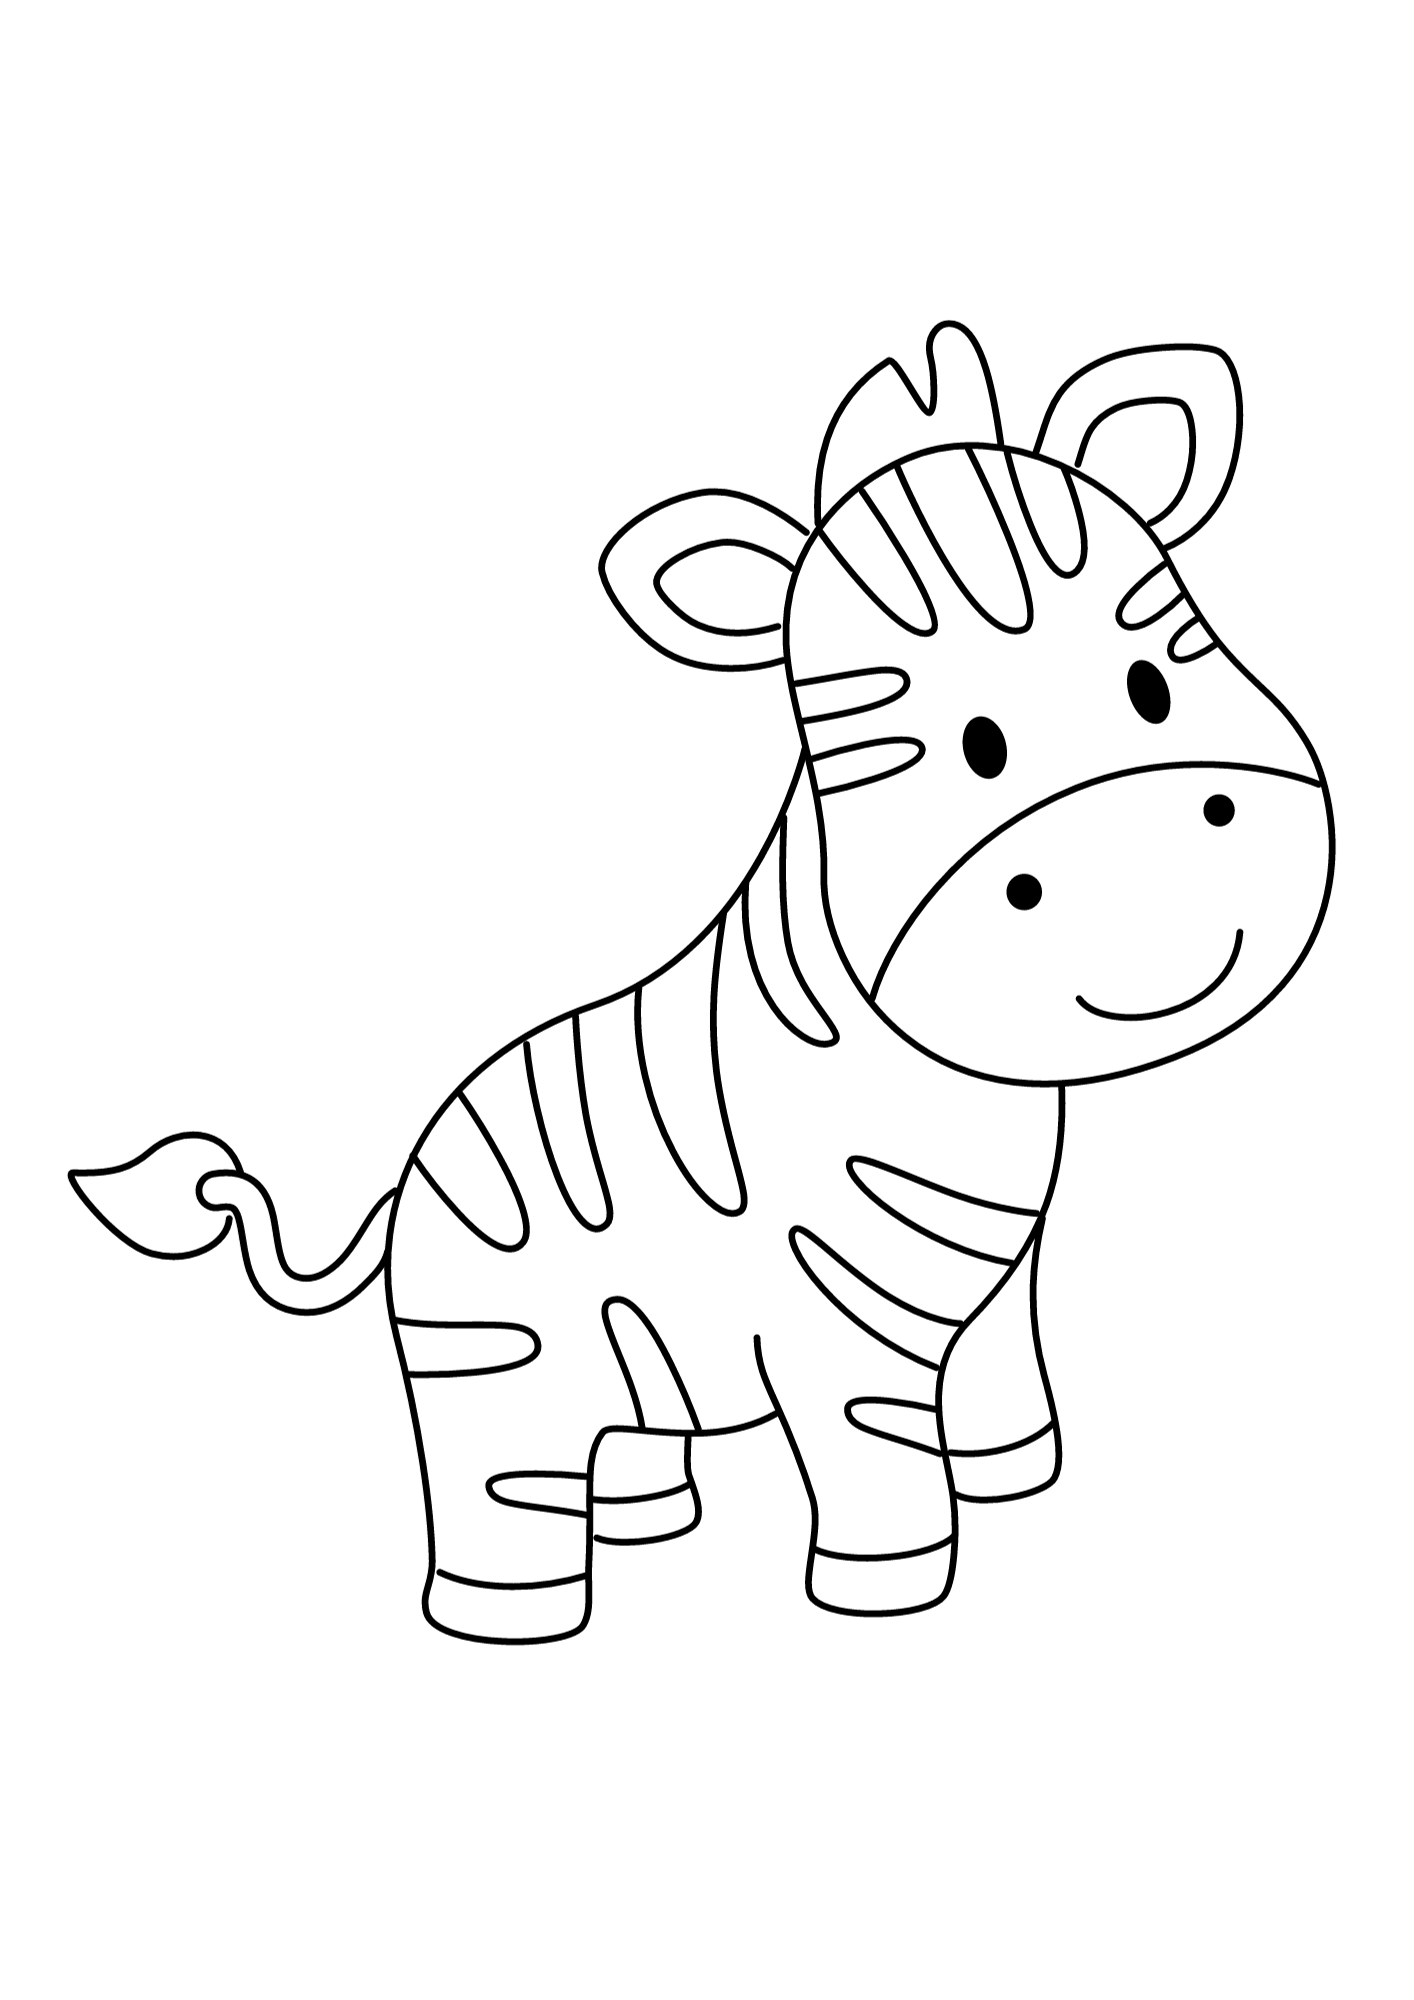 Lovely Zebra Coloring Pages